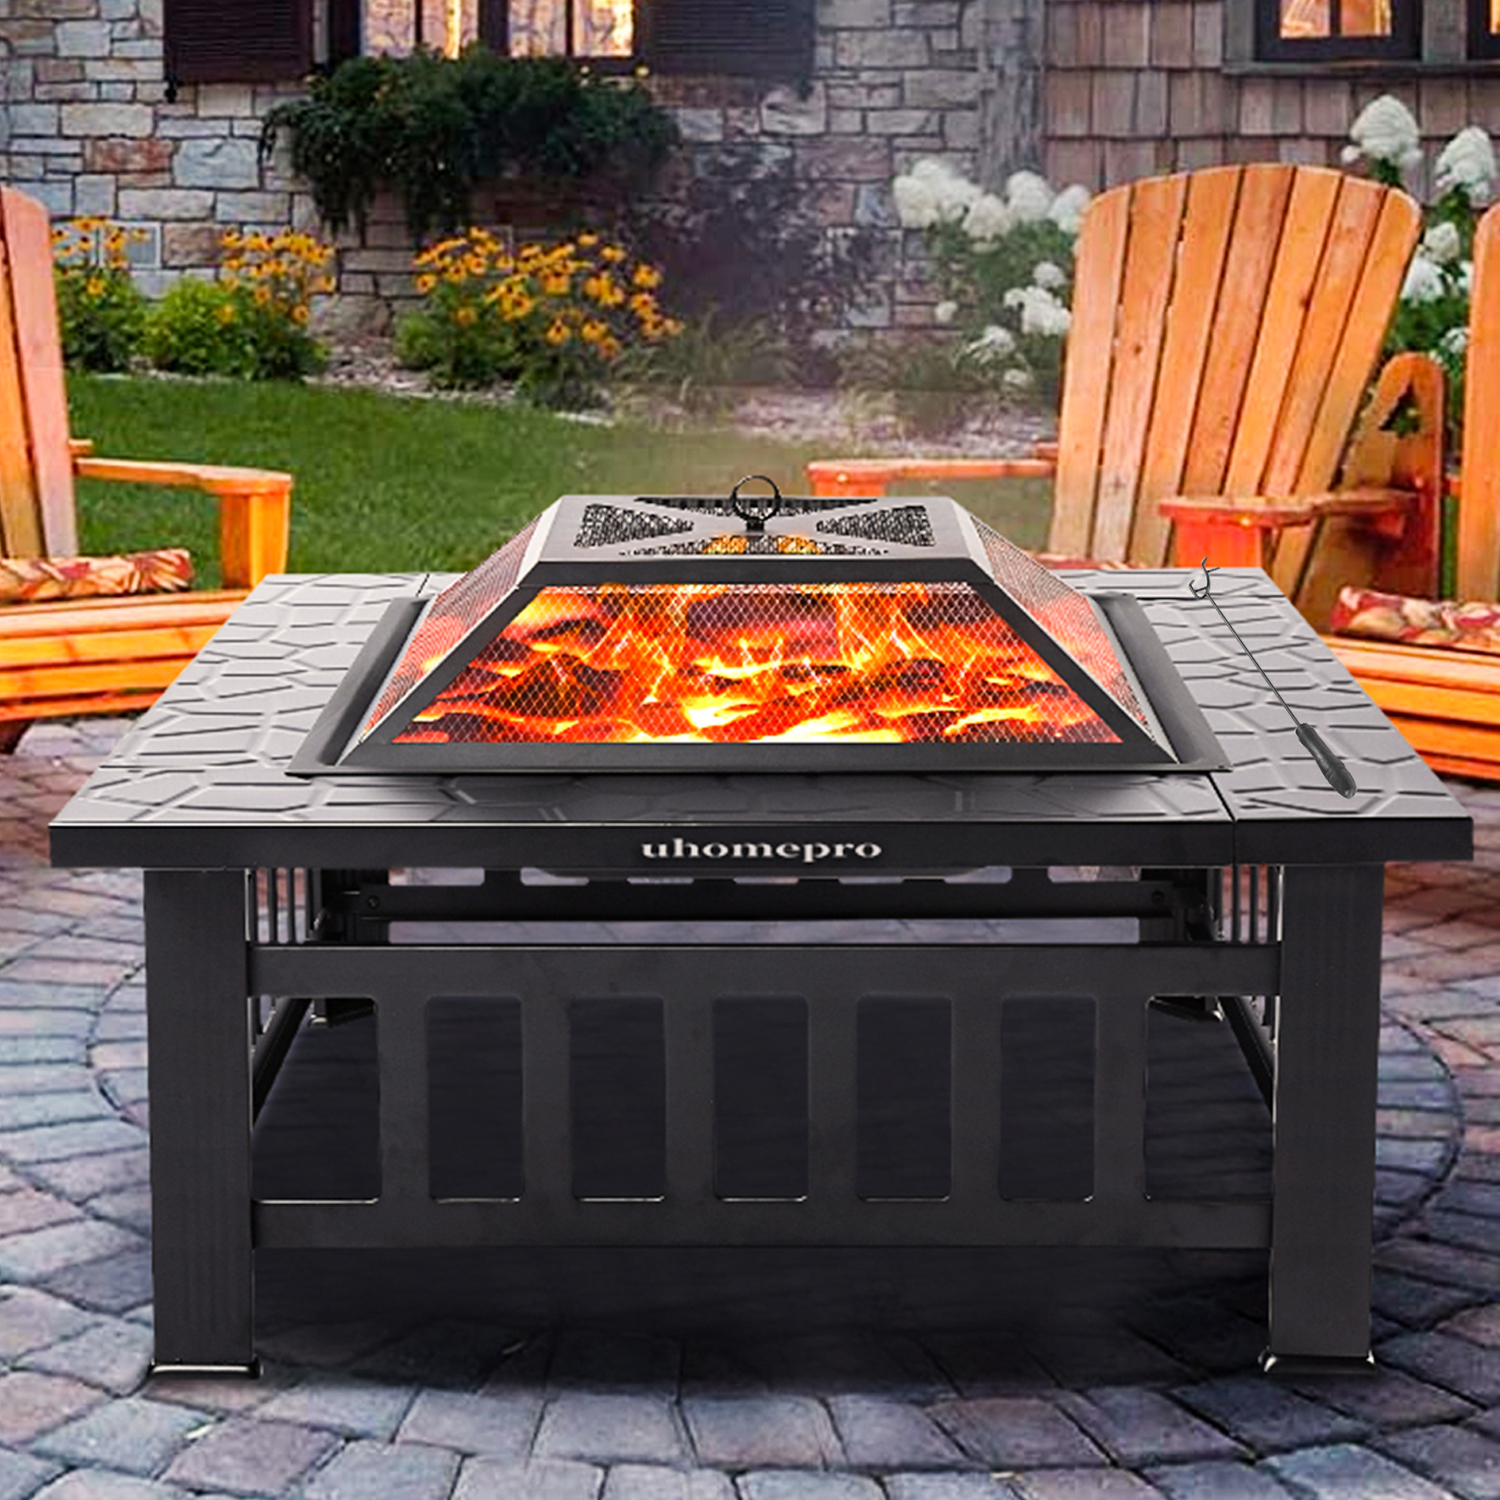 Fire Pits for Outside, 32" Wood Burning Fire Pit Tables with Screen Lid, Poker, BBQ Net, Ice Tray, Food Clip and Cover, Backyard Patio Garden Outdoor Fire Pit/Ice Pit/BBQ Fire Pit, Black - image 1 of 10